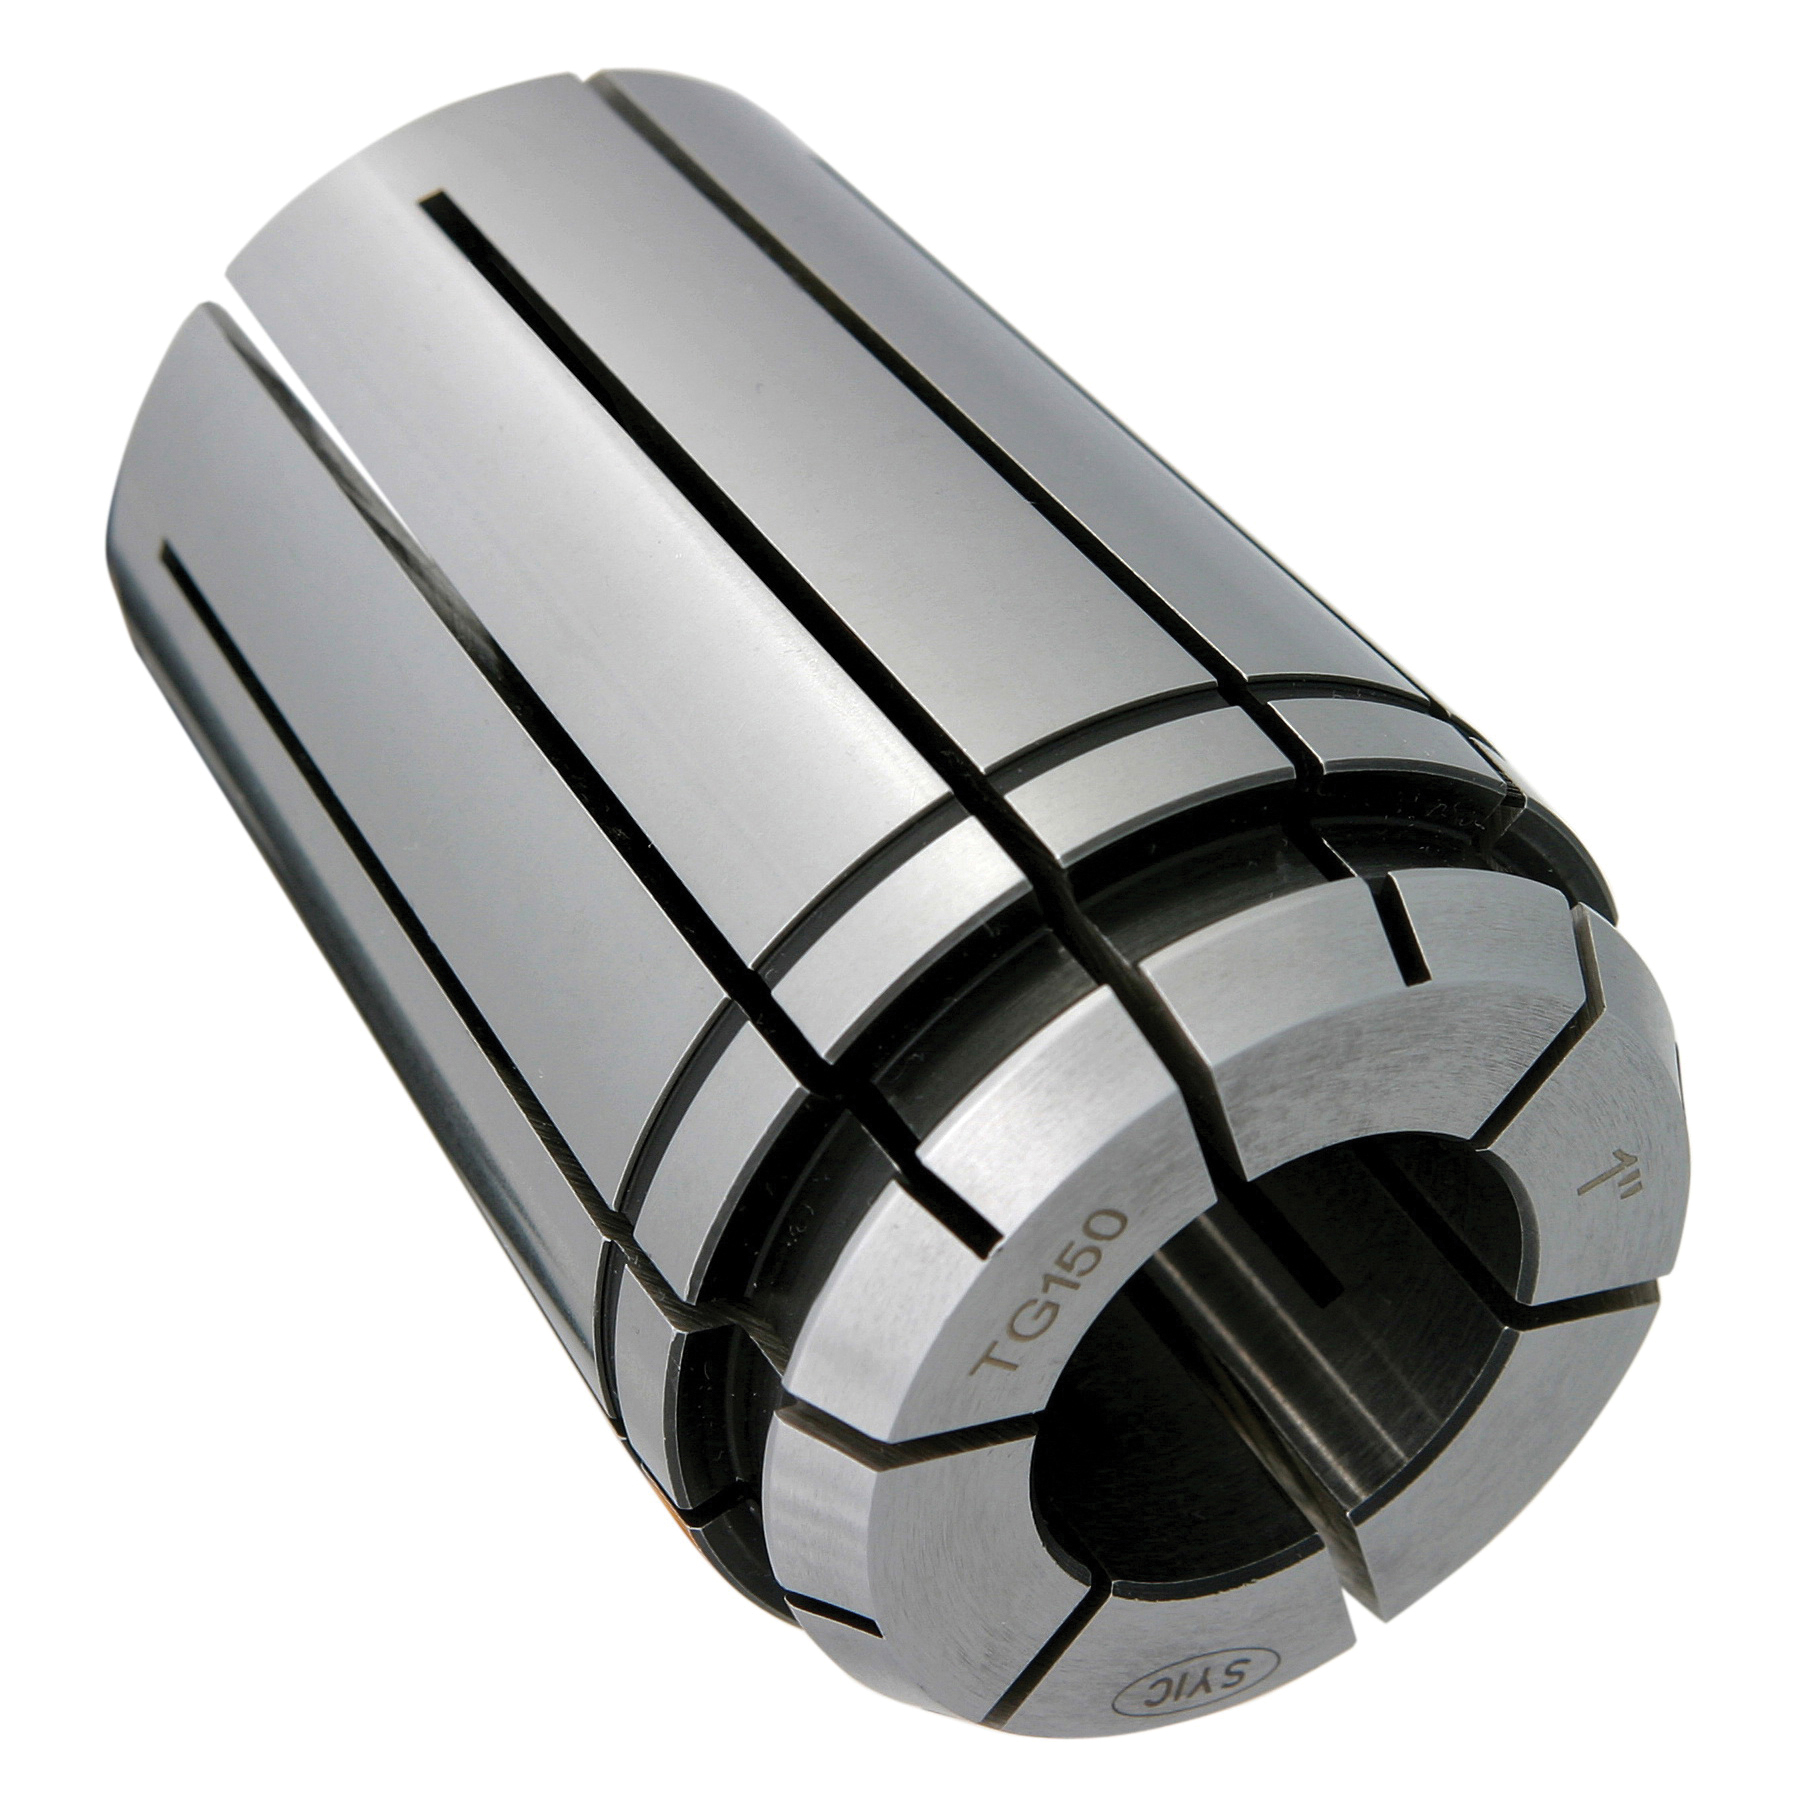 TG150 1-25/64" COLLET